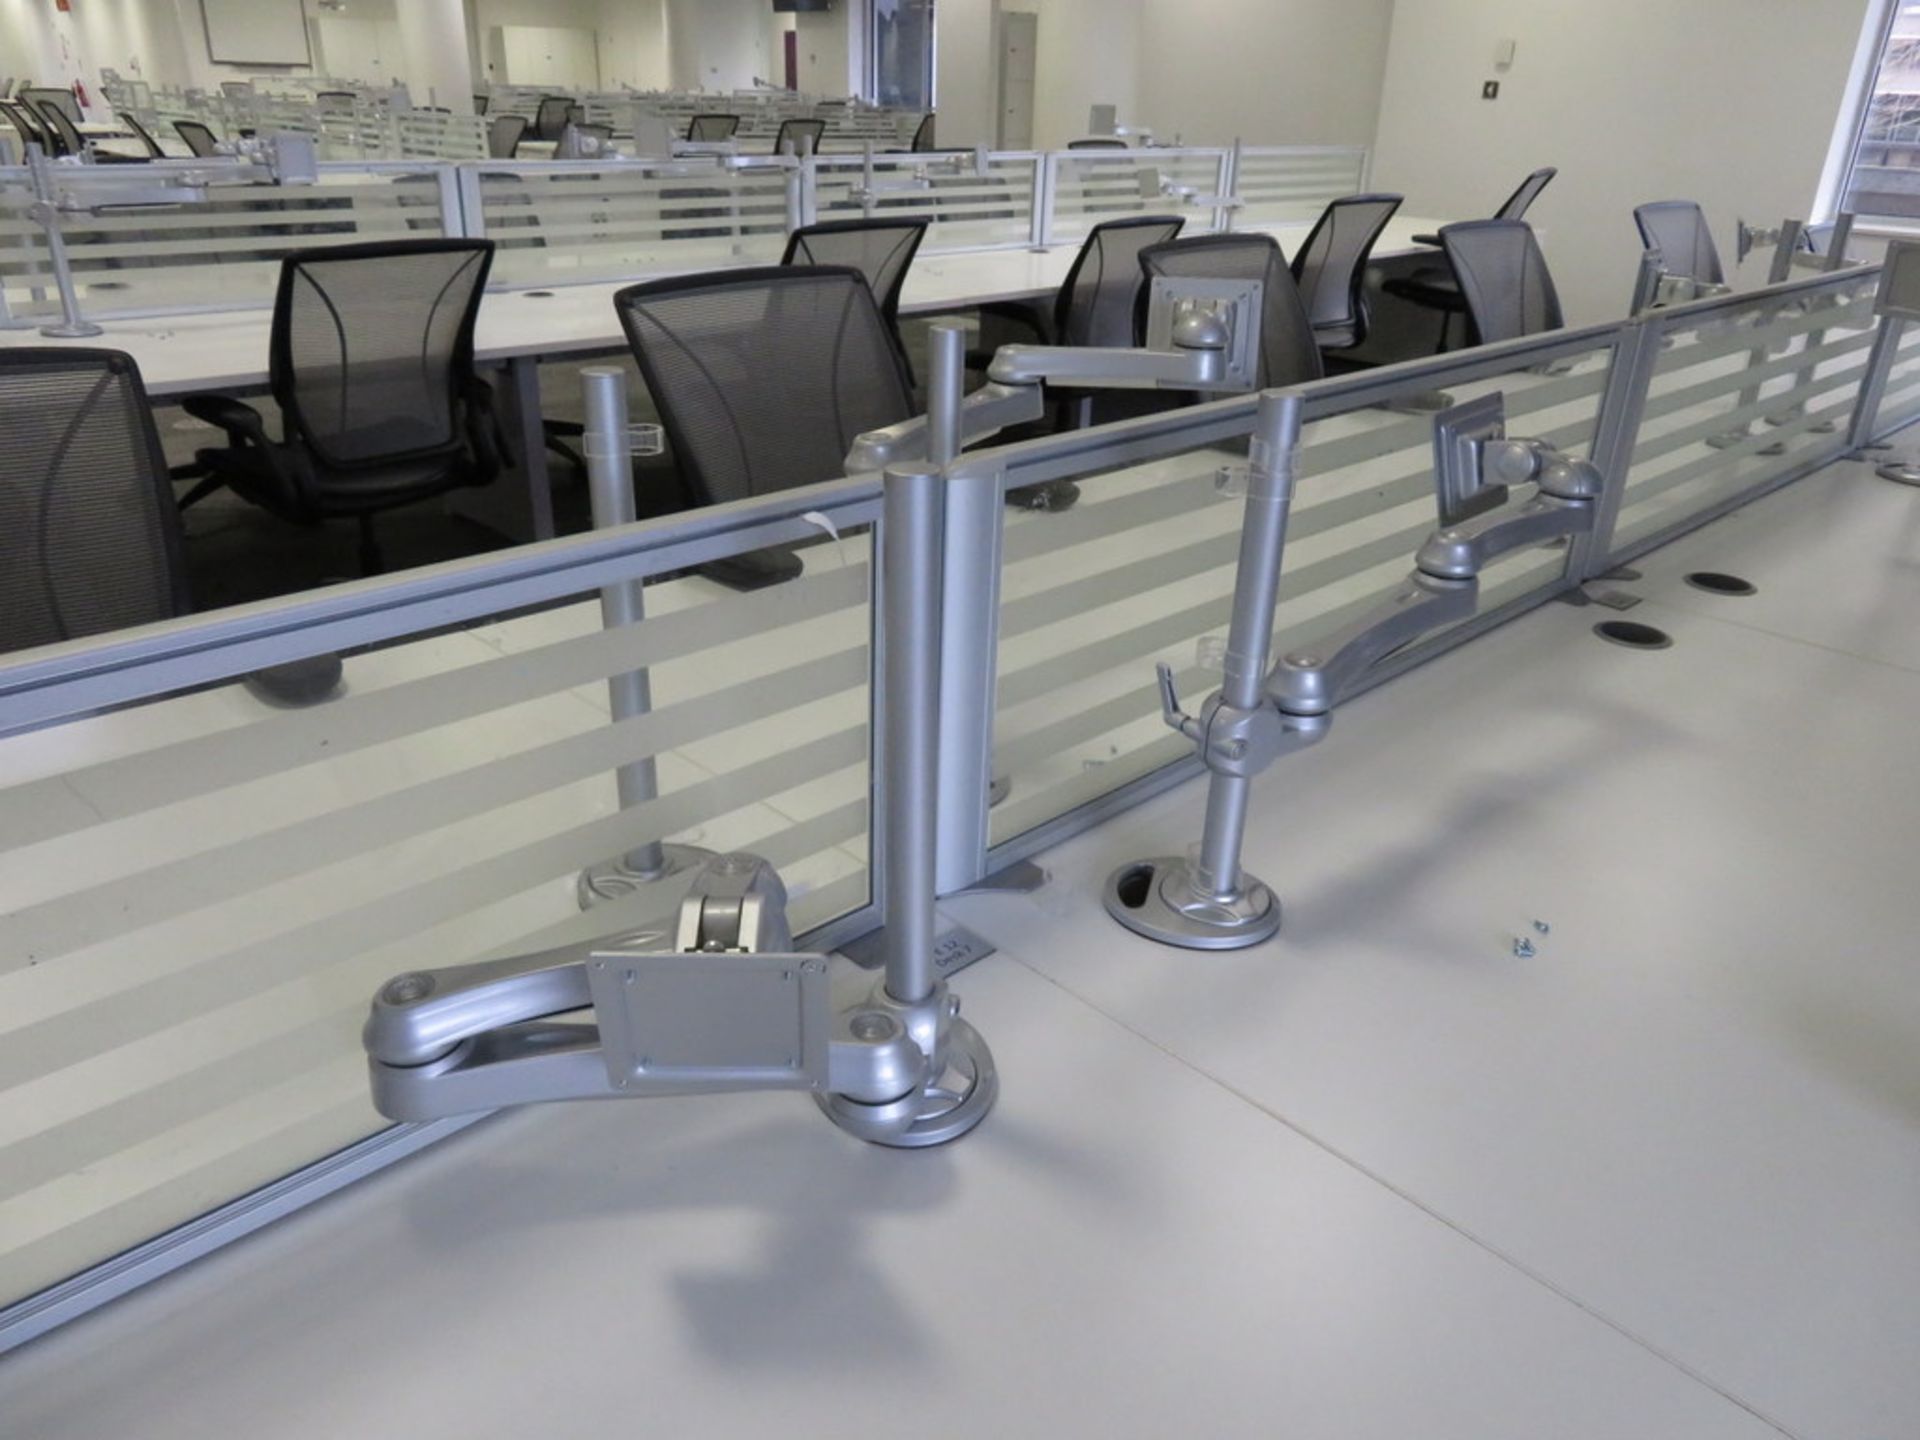 12 Person Desk Arrangement With Dividers & Monitor Arms. Please Note The Chairs Are Not Included. - Image 3 of 4